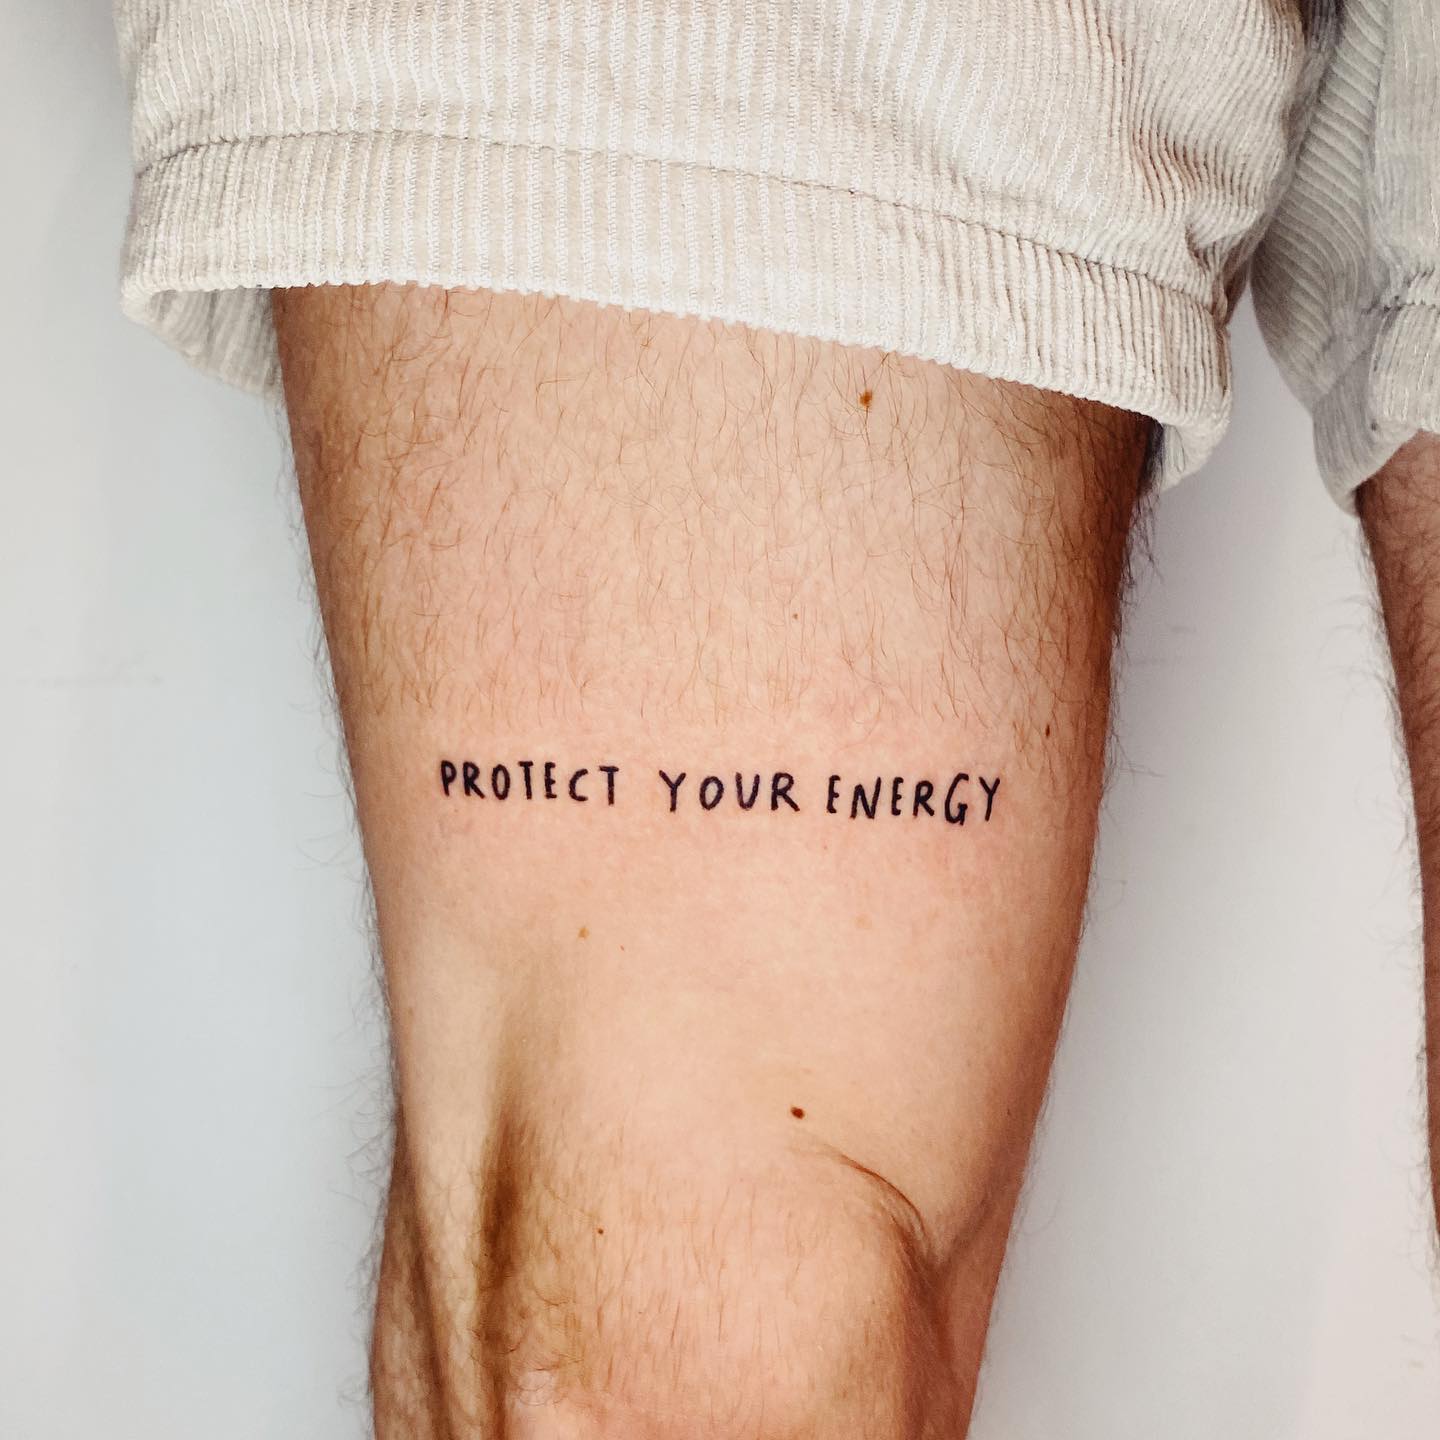 “Protect Your Energy” Tattoo on Leg for Men